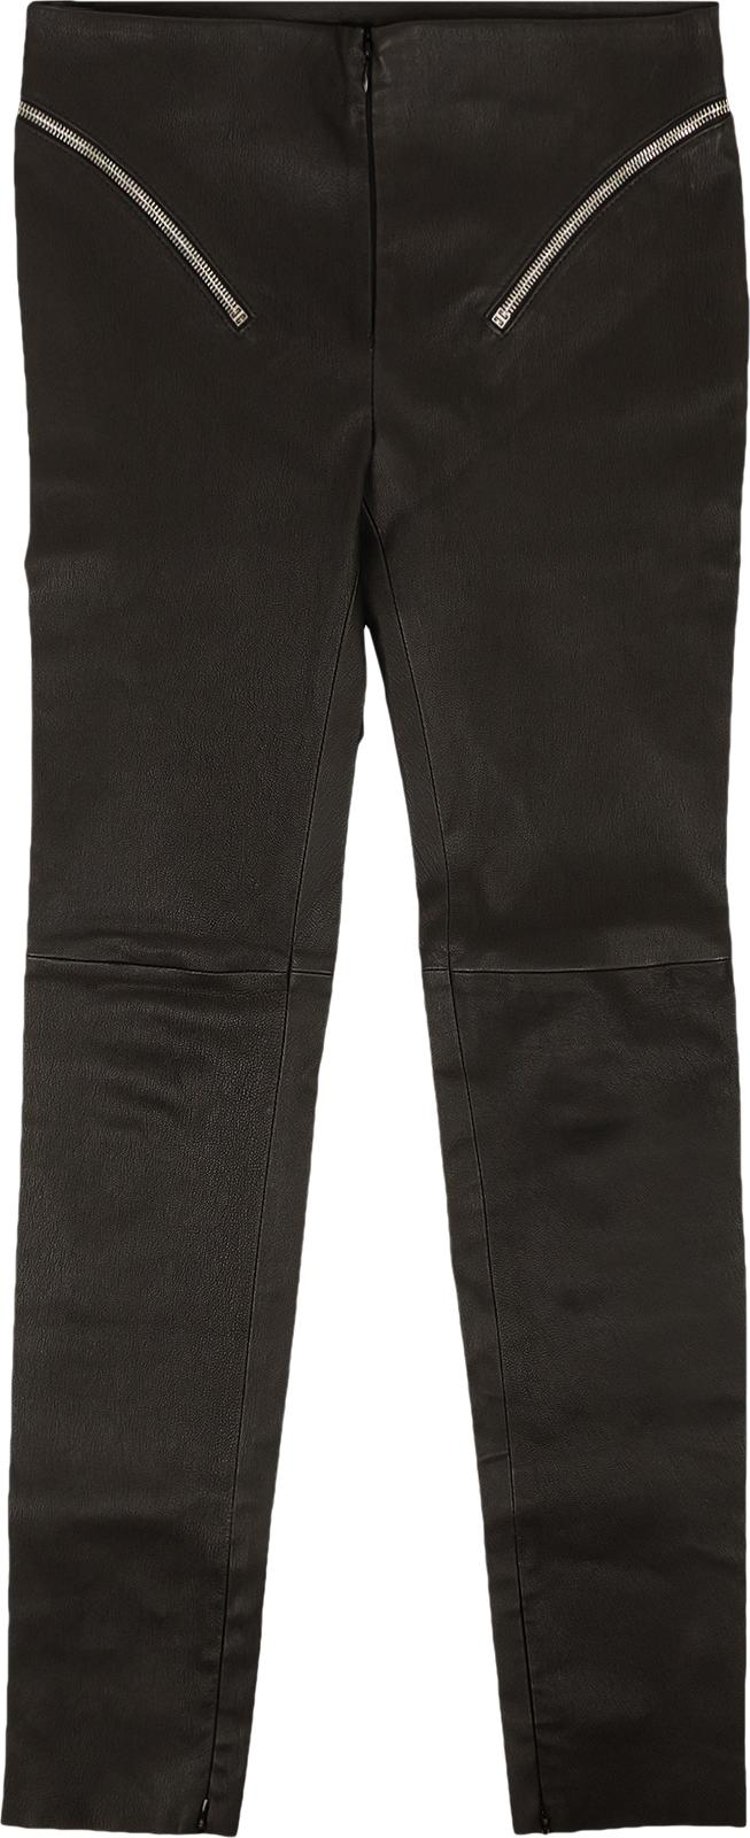 Givenchy Pants In Leather With Zip Details 'Black'